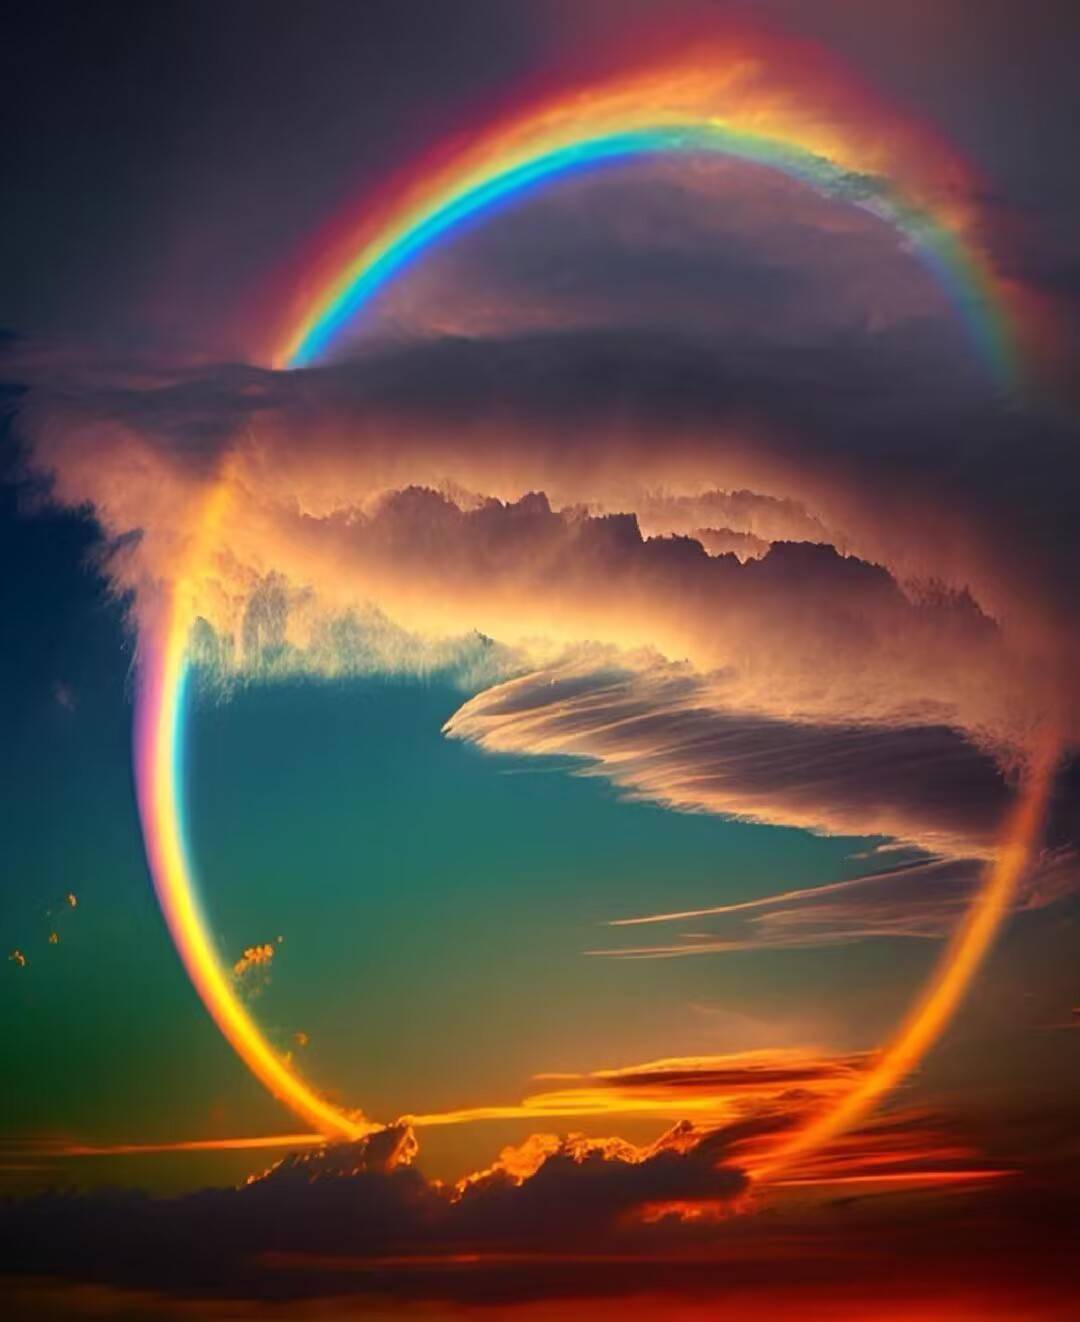 a complete rainbow, photo was taken at around 30k ft above the earth, on the ground, we usually only see the arc half of the circle, lloyd j ferraro